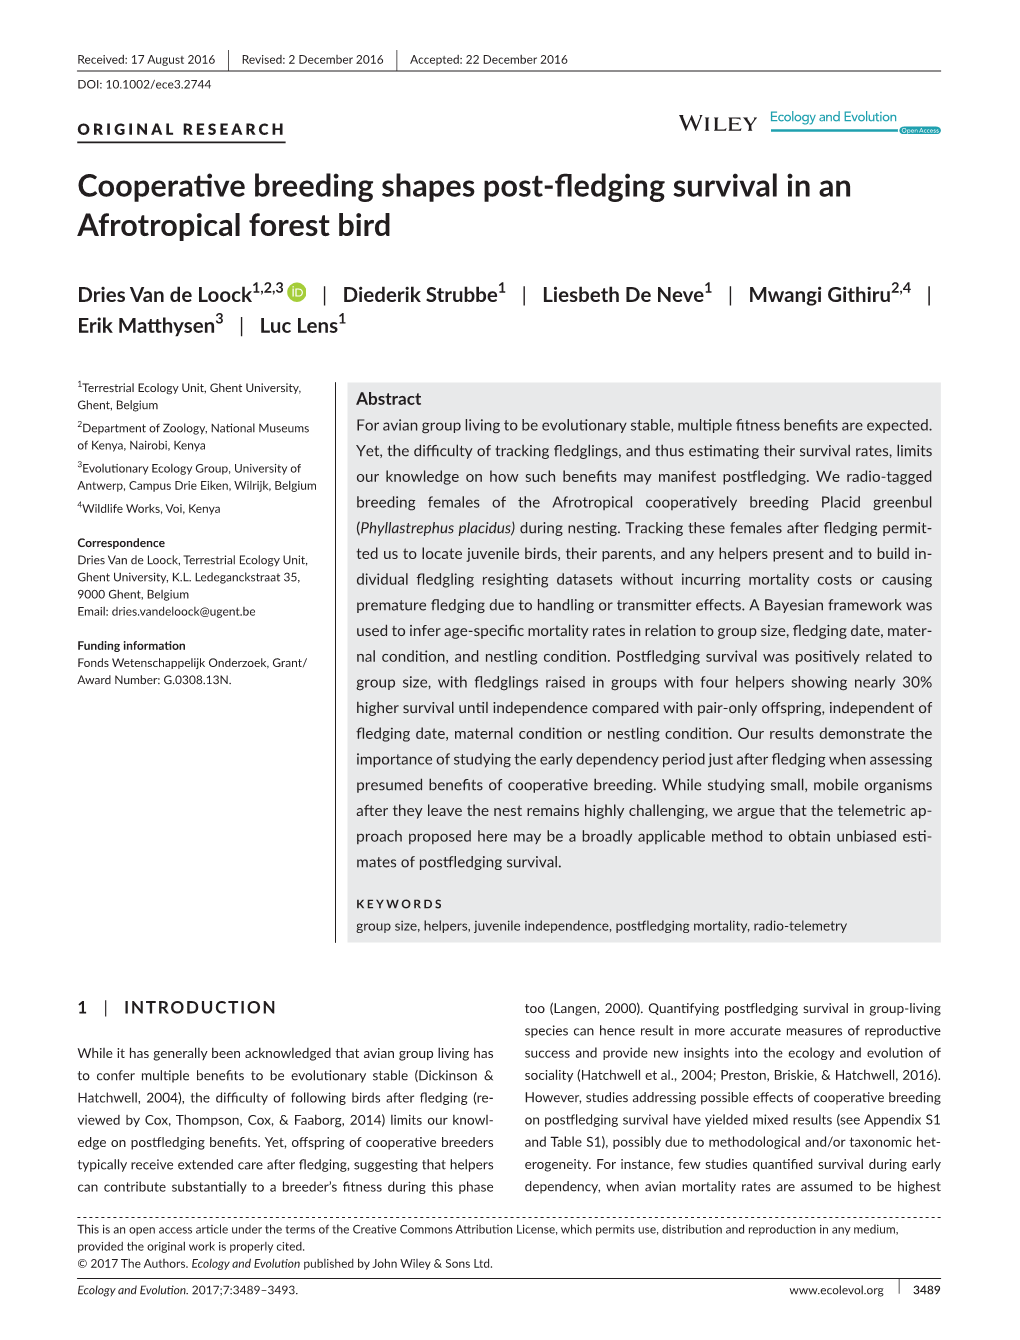 Cooperative Breeding Shapes Post&#X2010;Fledging Survival in An